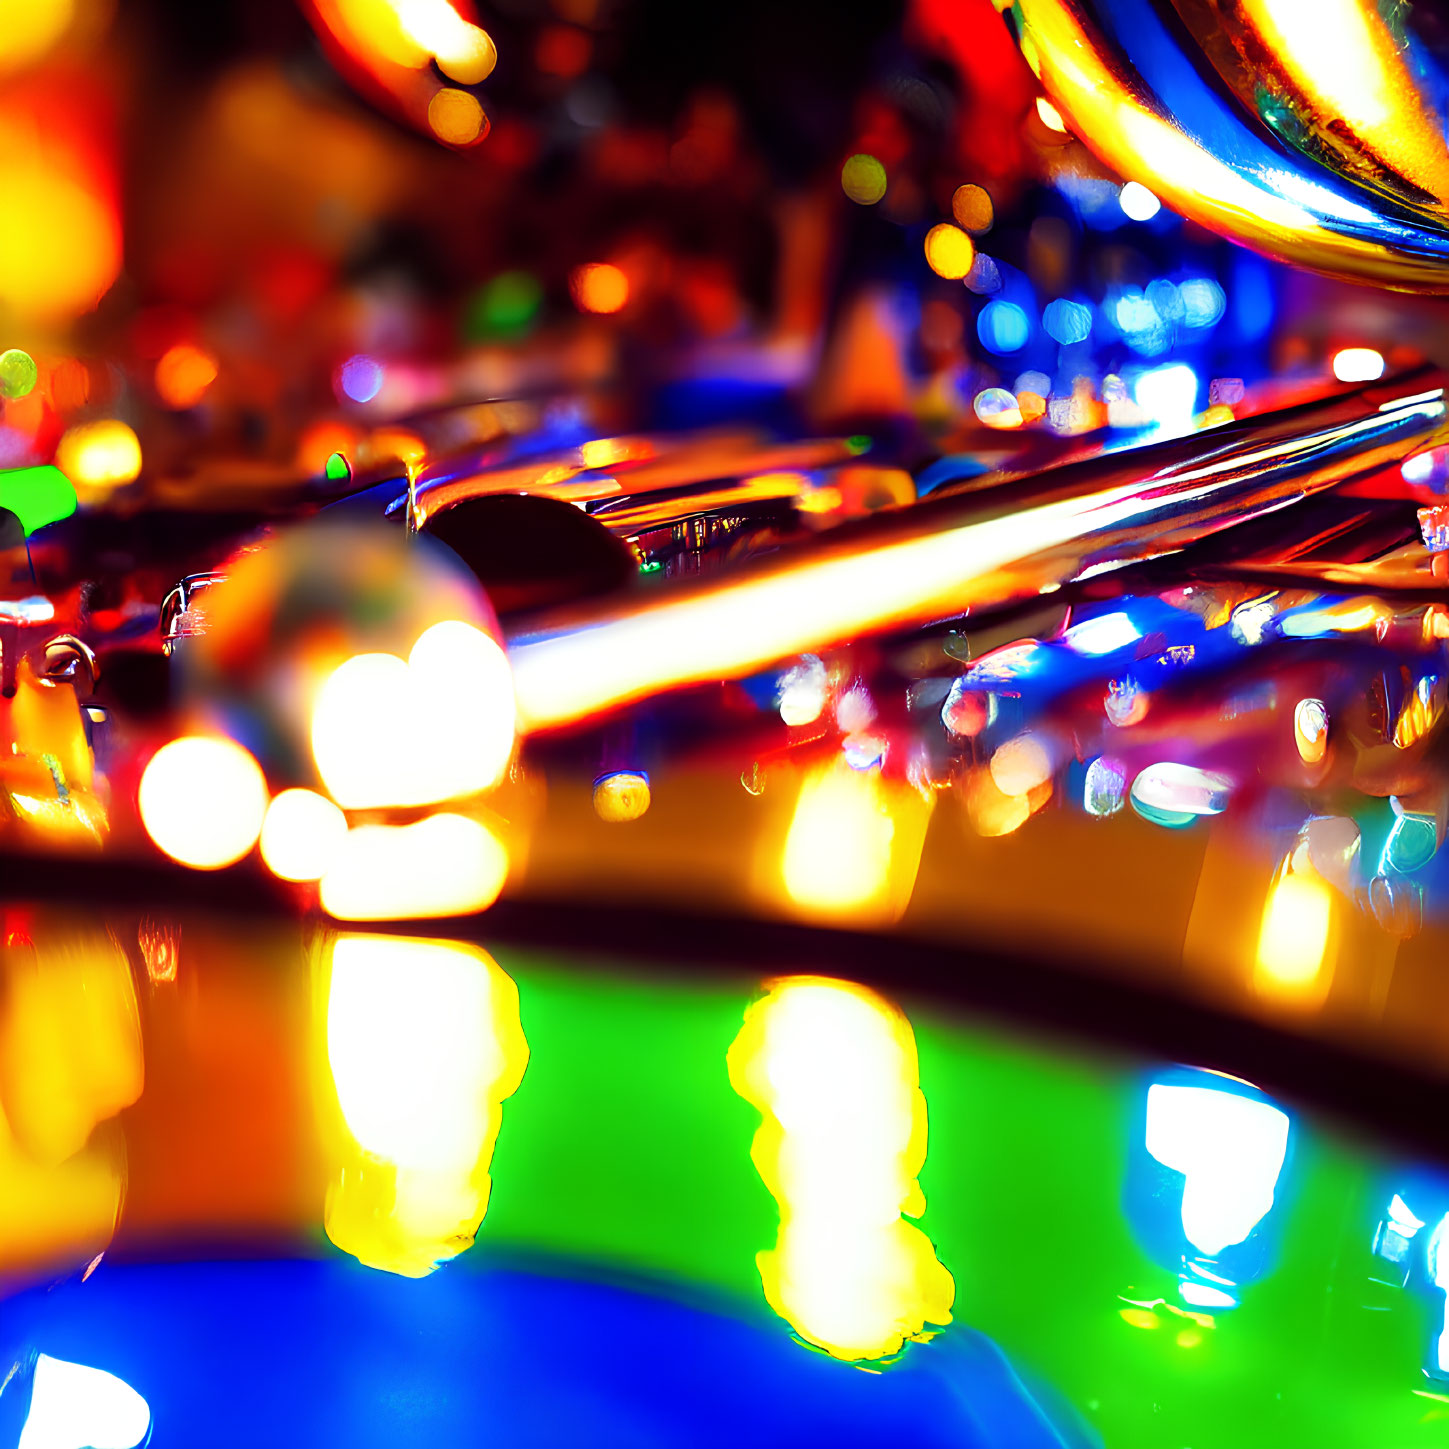 Colorful, Shiny Pinball Machine Elements with Vibrant Lights and Reflections